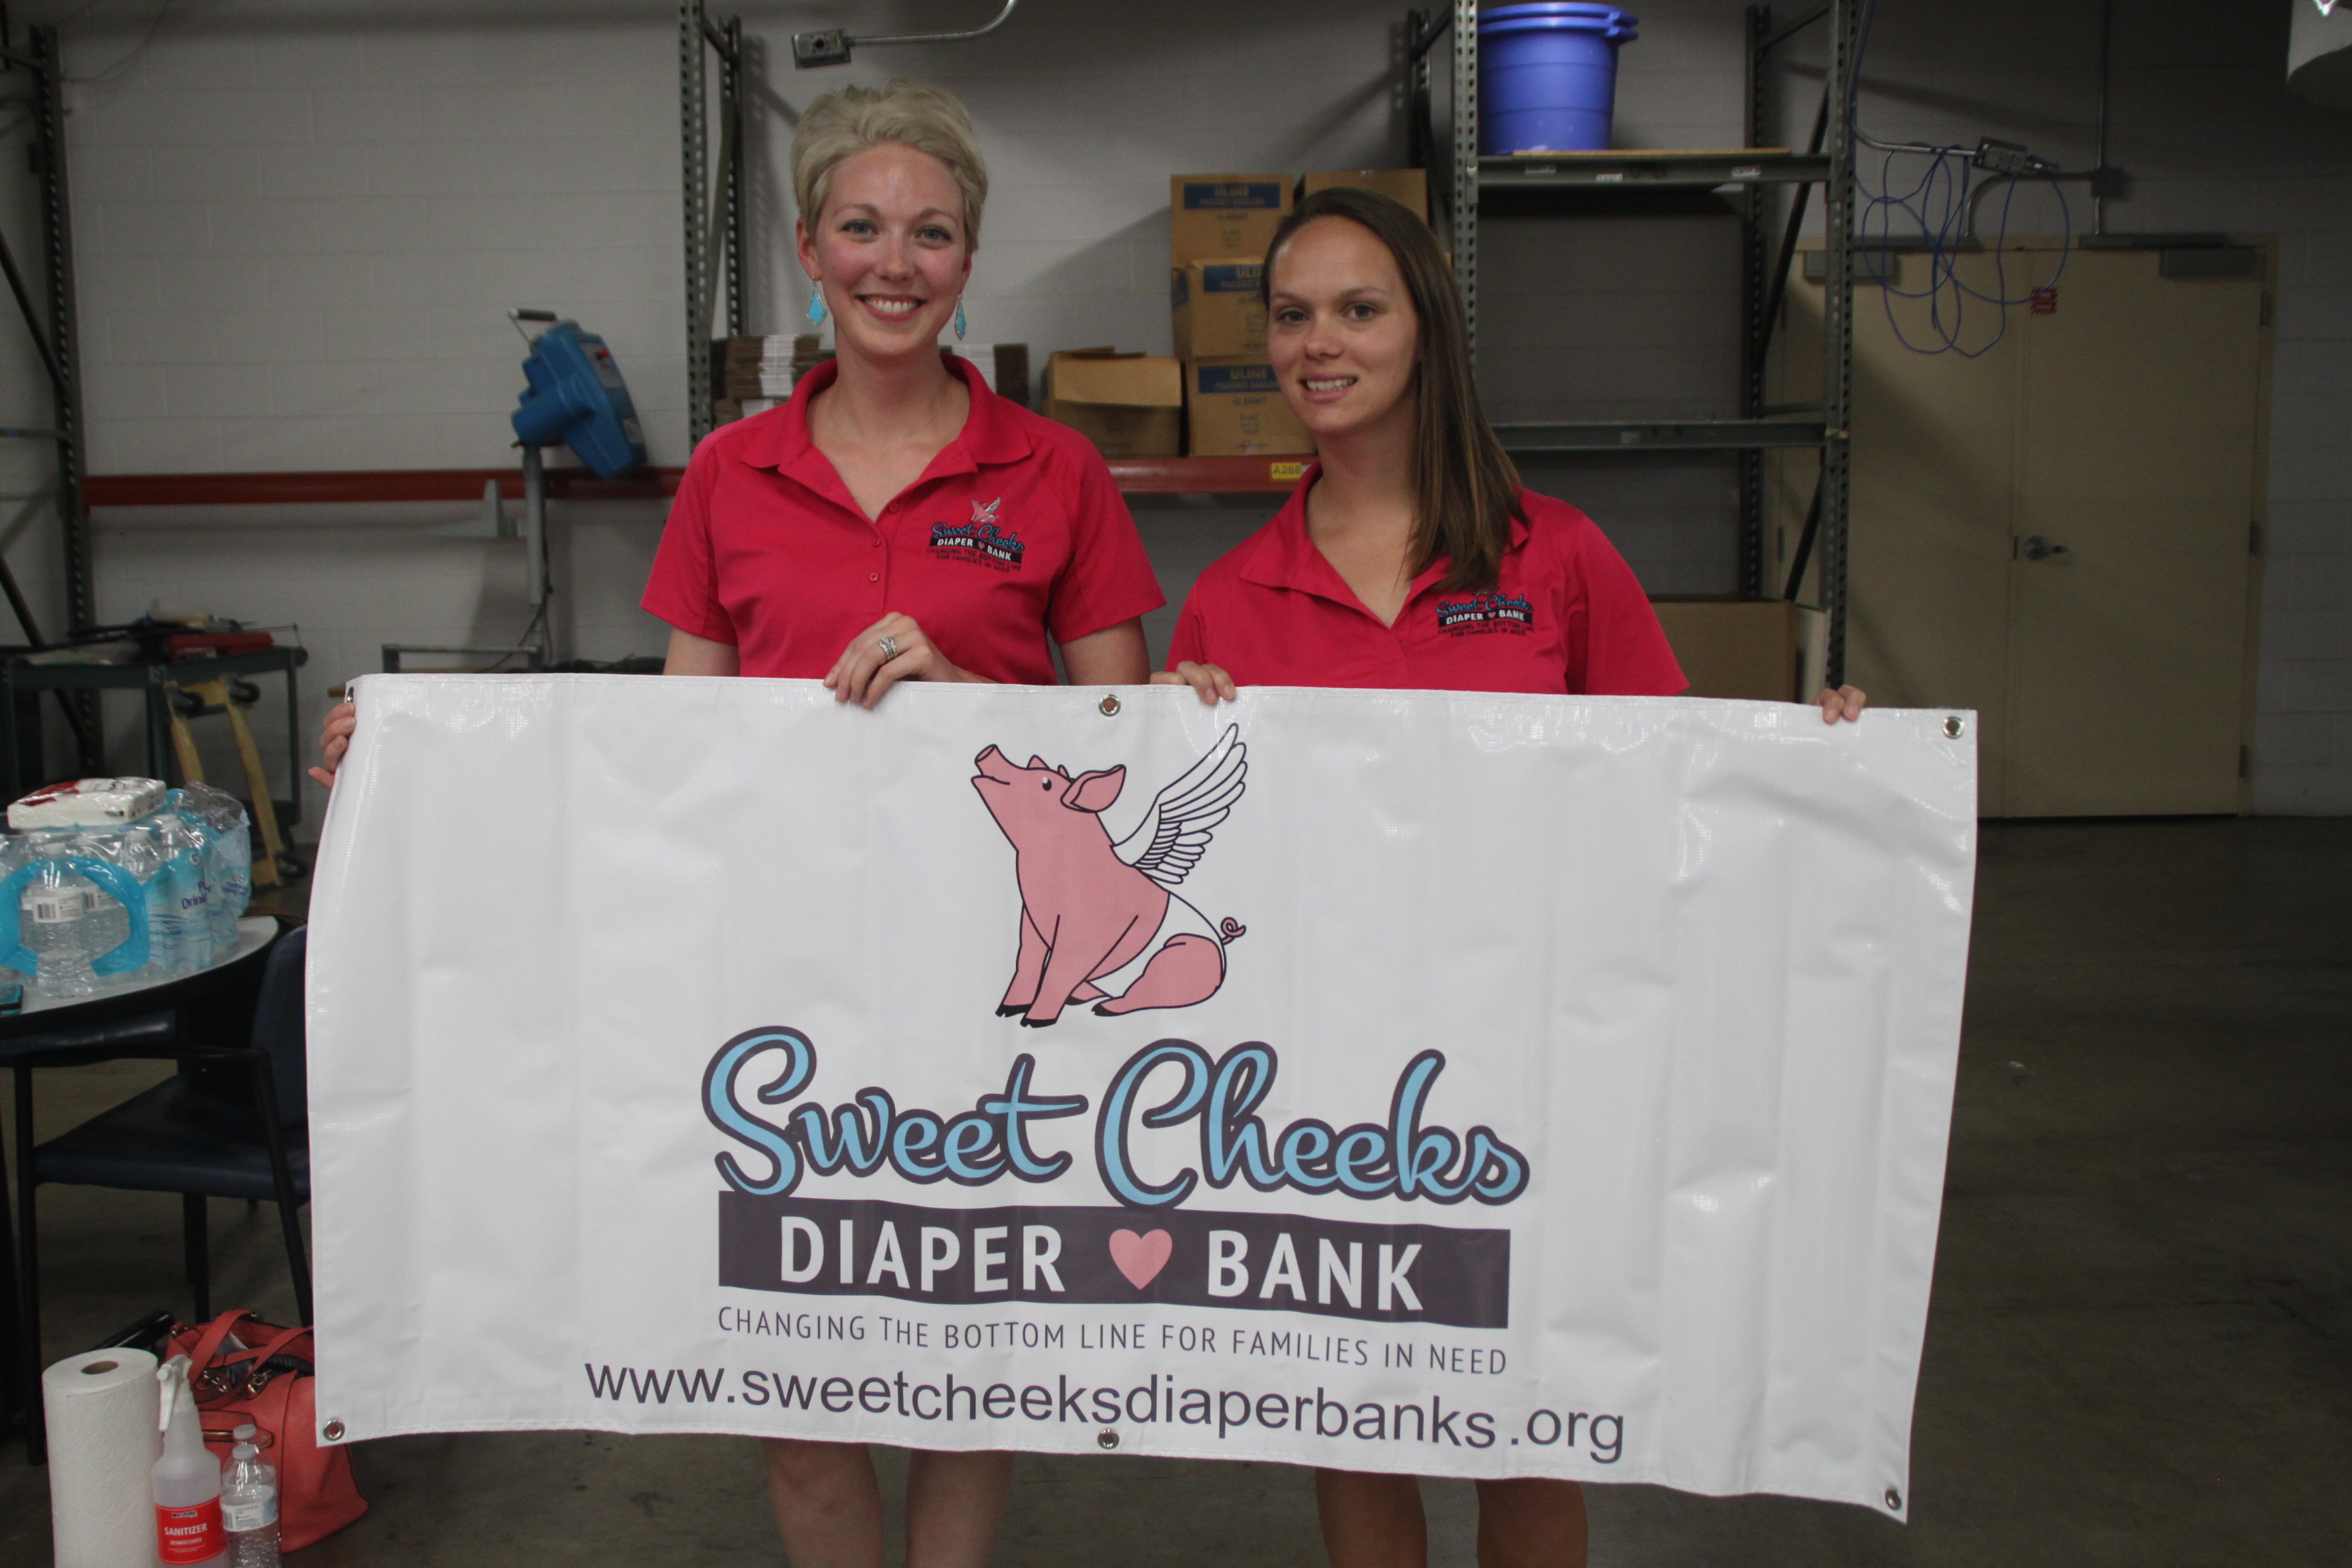 Megan Fischer, founder of Sweet Cheeks Diaper Bank, and Jamie Mack, volunteer coordinator, pose for a photo in the warehouse where they sort, package and distribute diapers to local partner agencies.